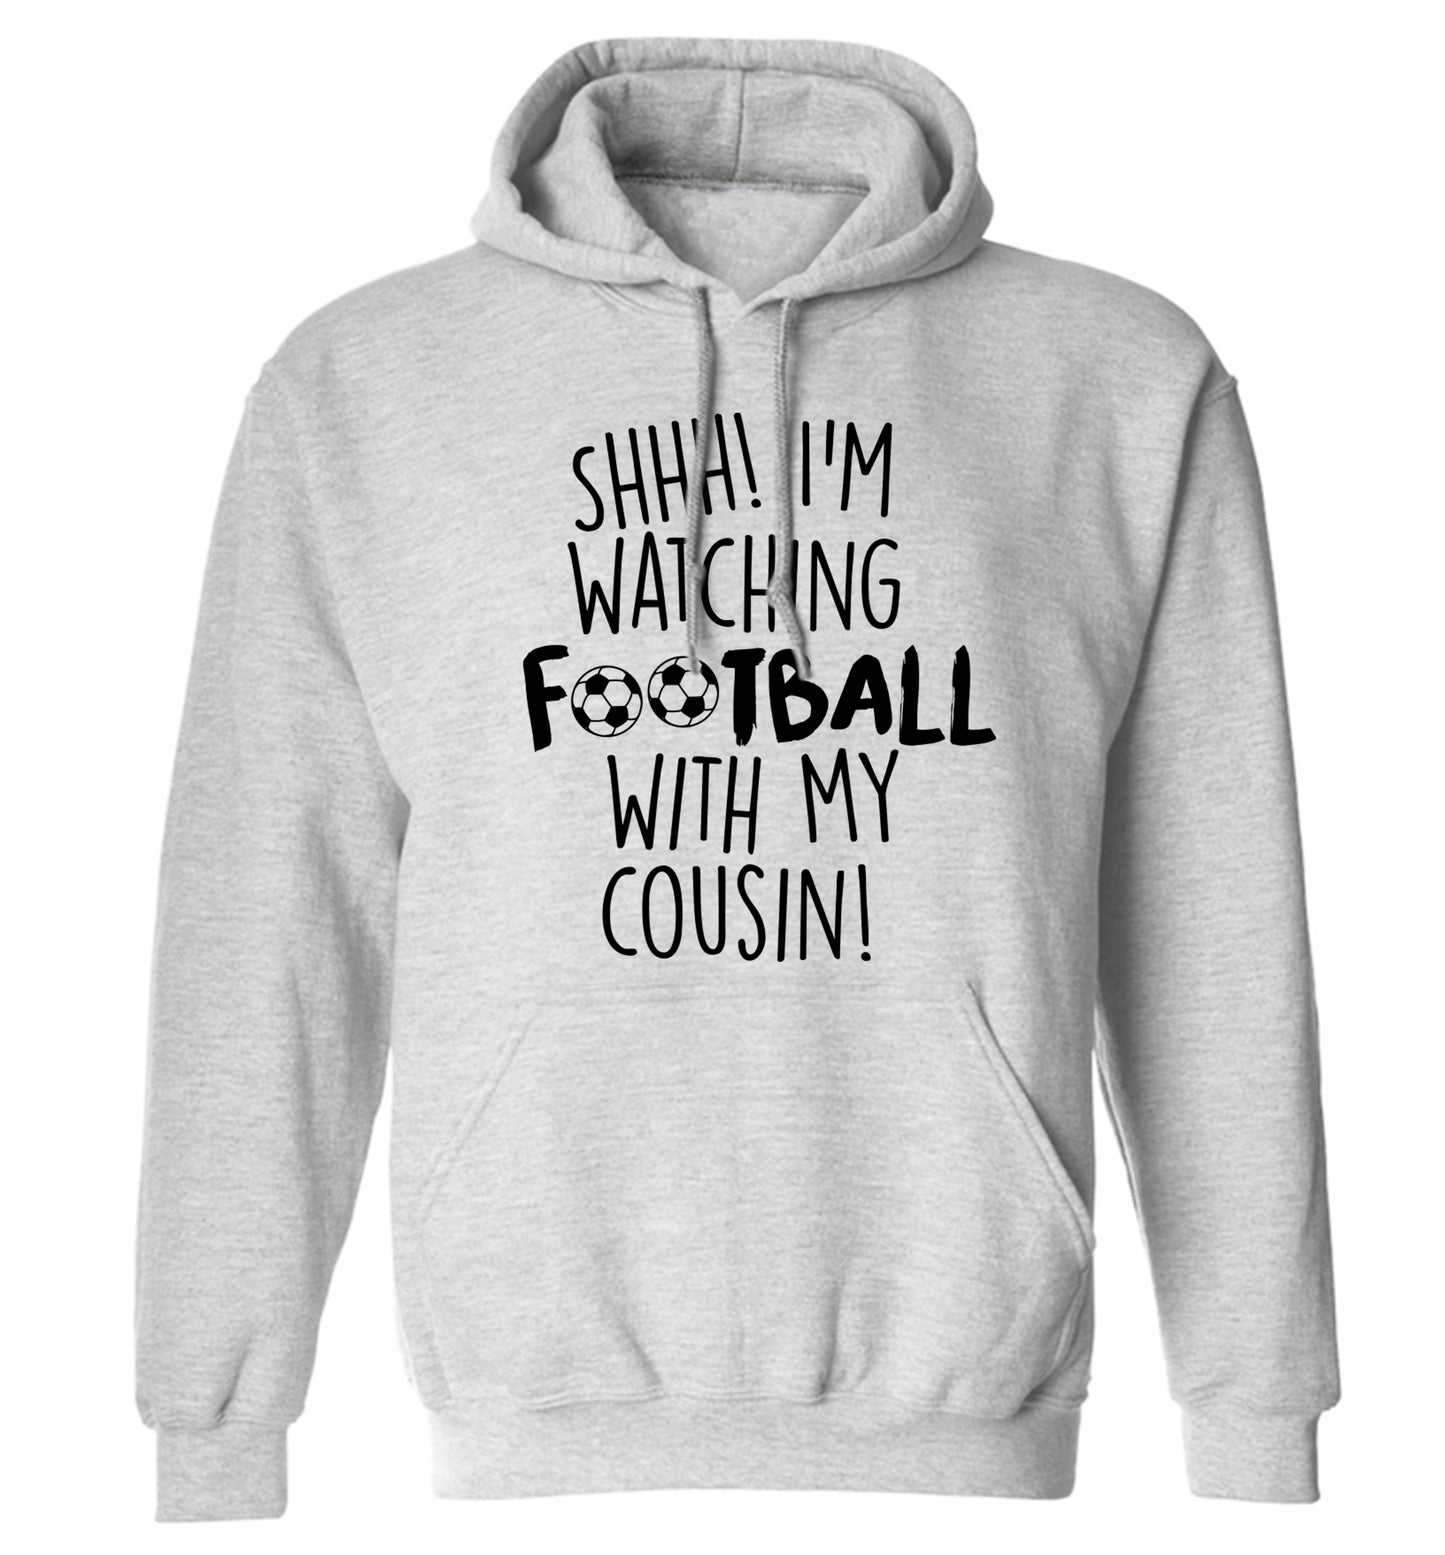 Shhh I'm watching football with my cousin adults unisexgrey hoodie 2XL